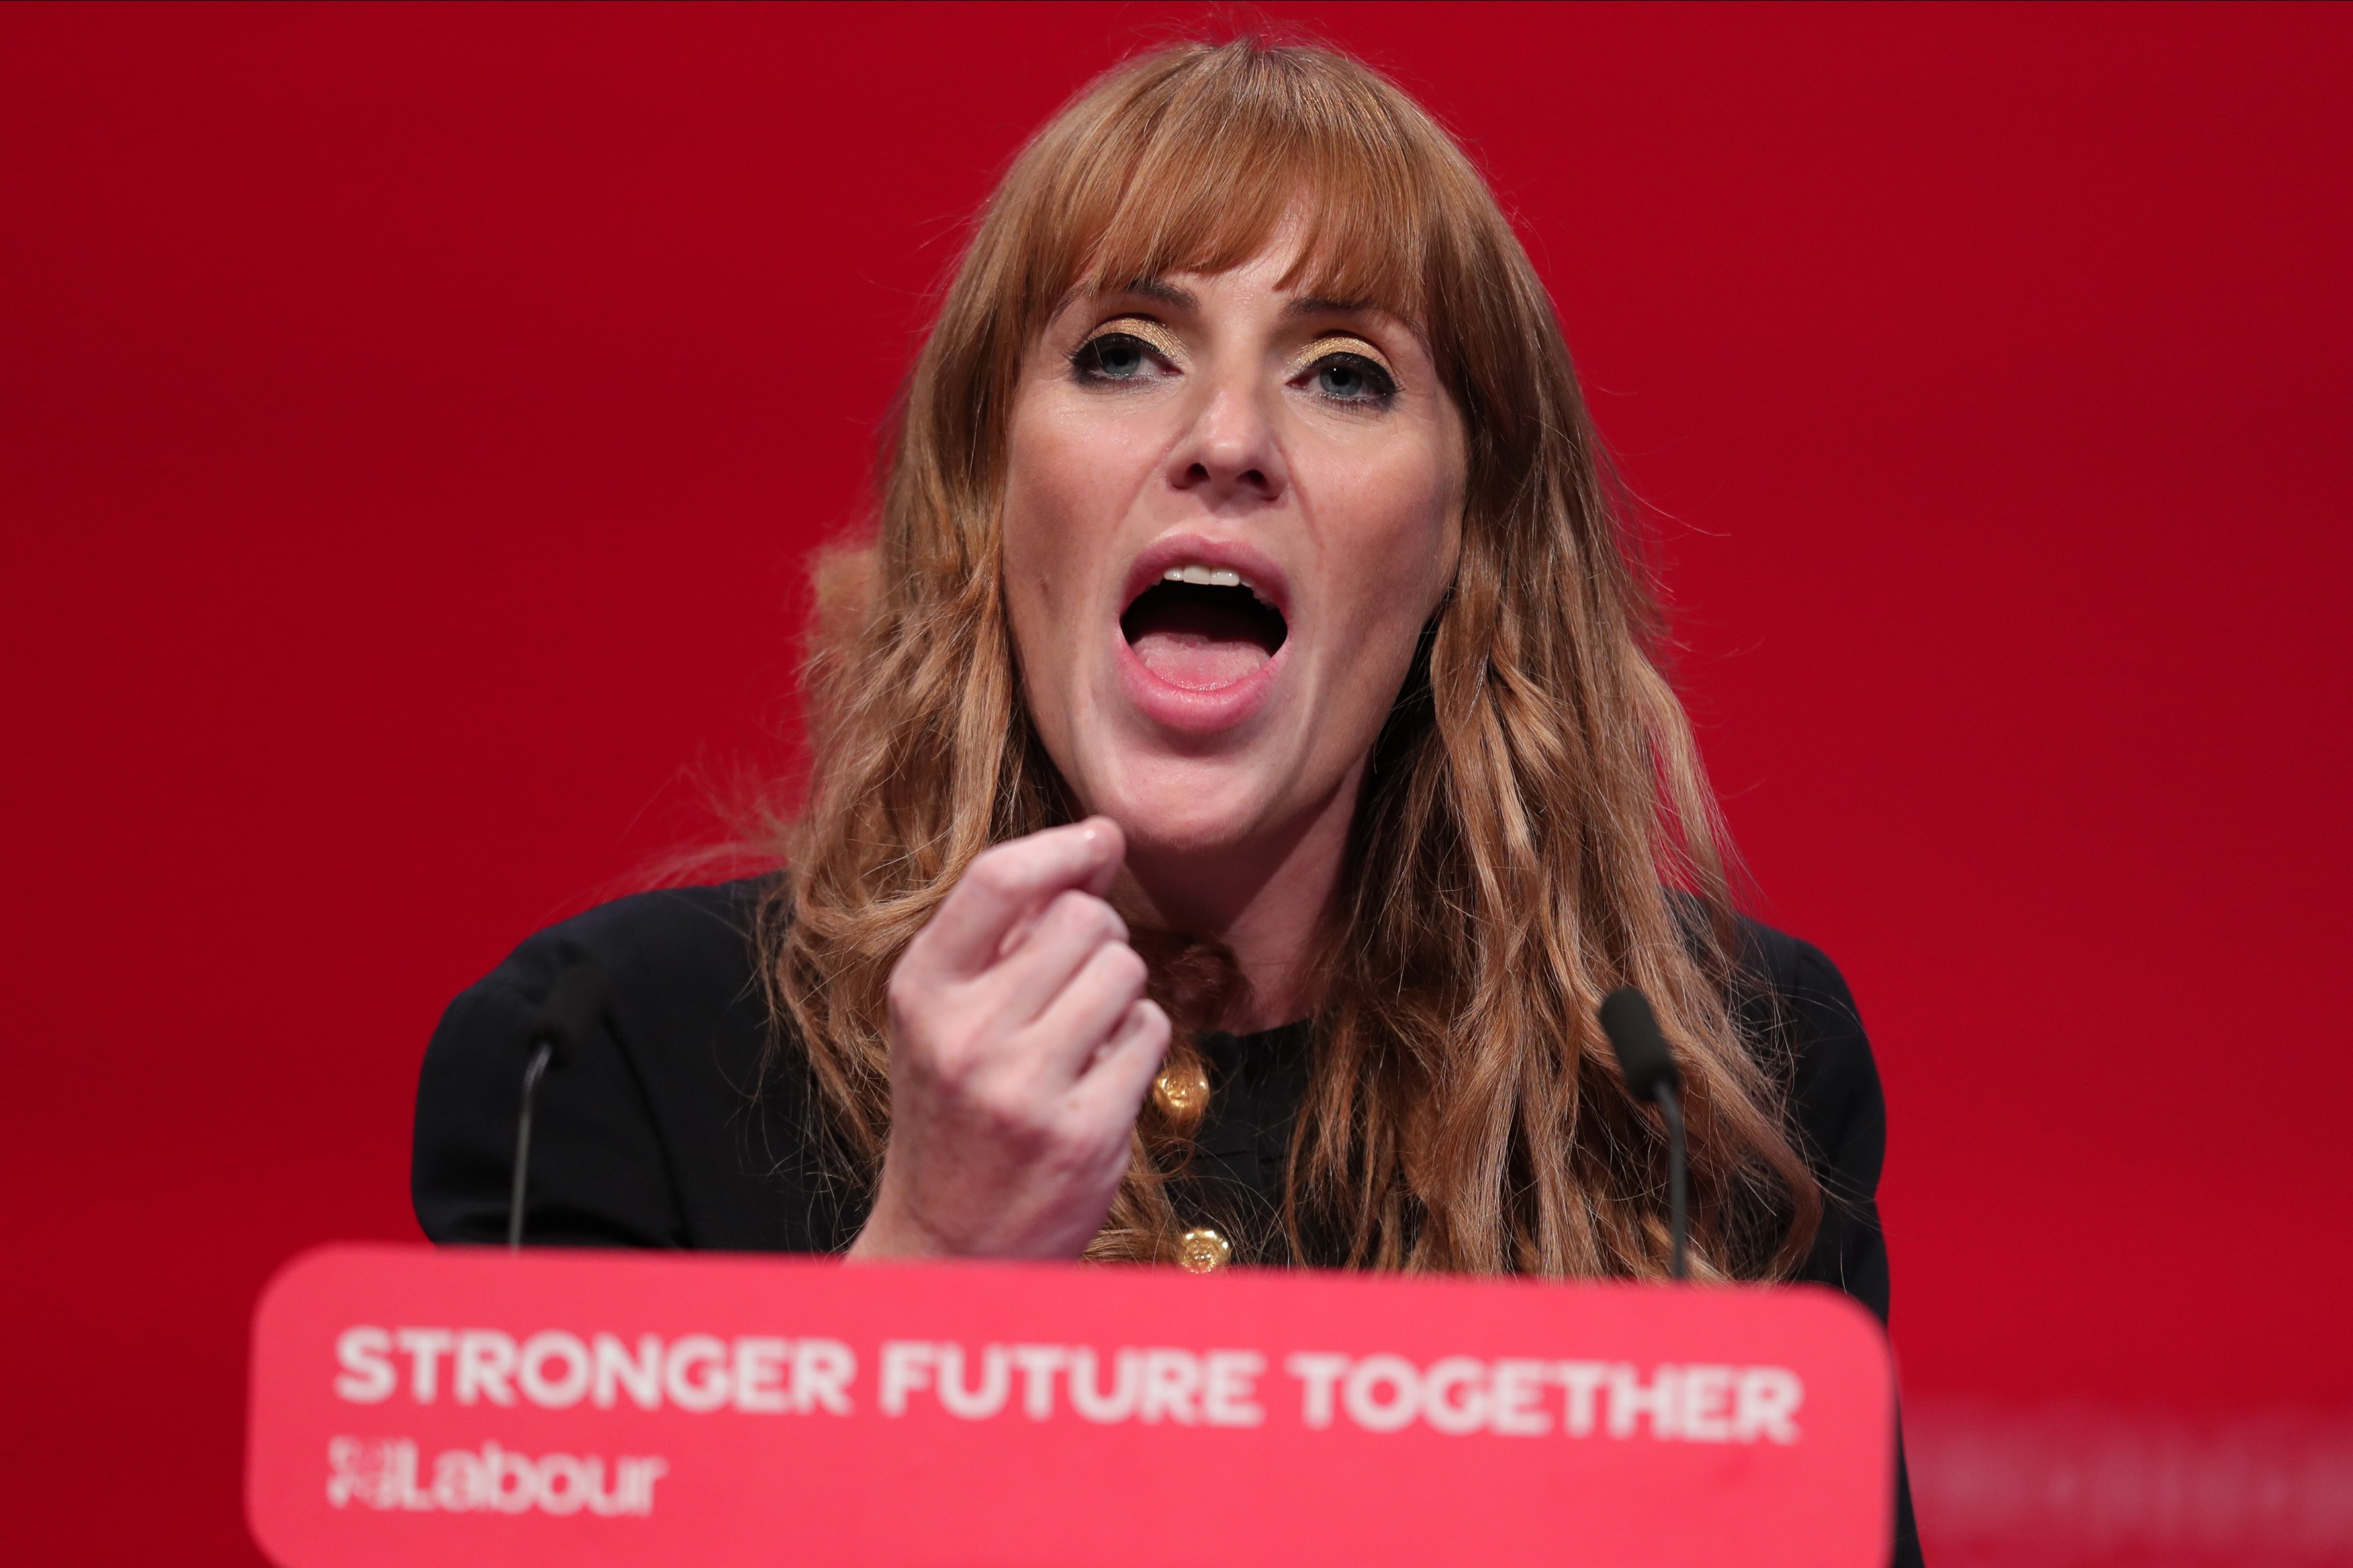 MP Angela Rayner has finally expressed her apologies after branding the Tories 'scum'